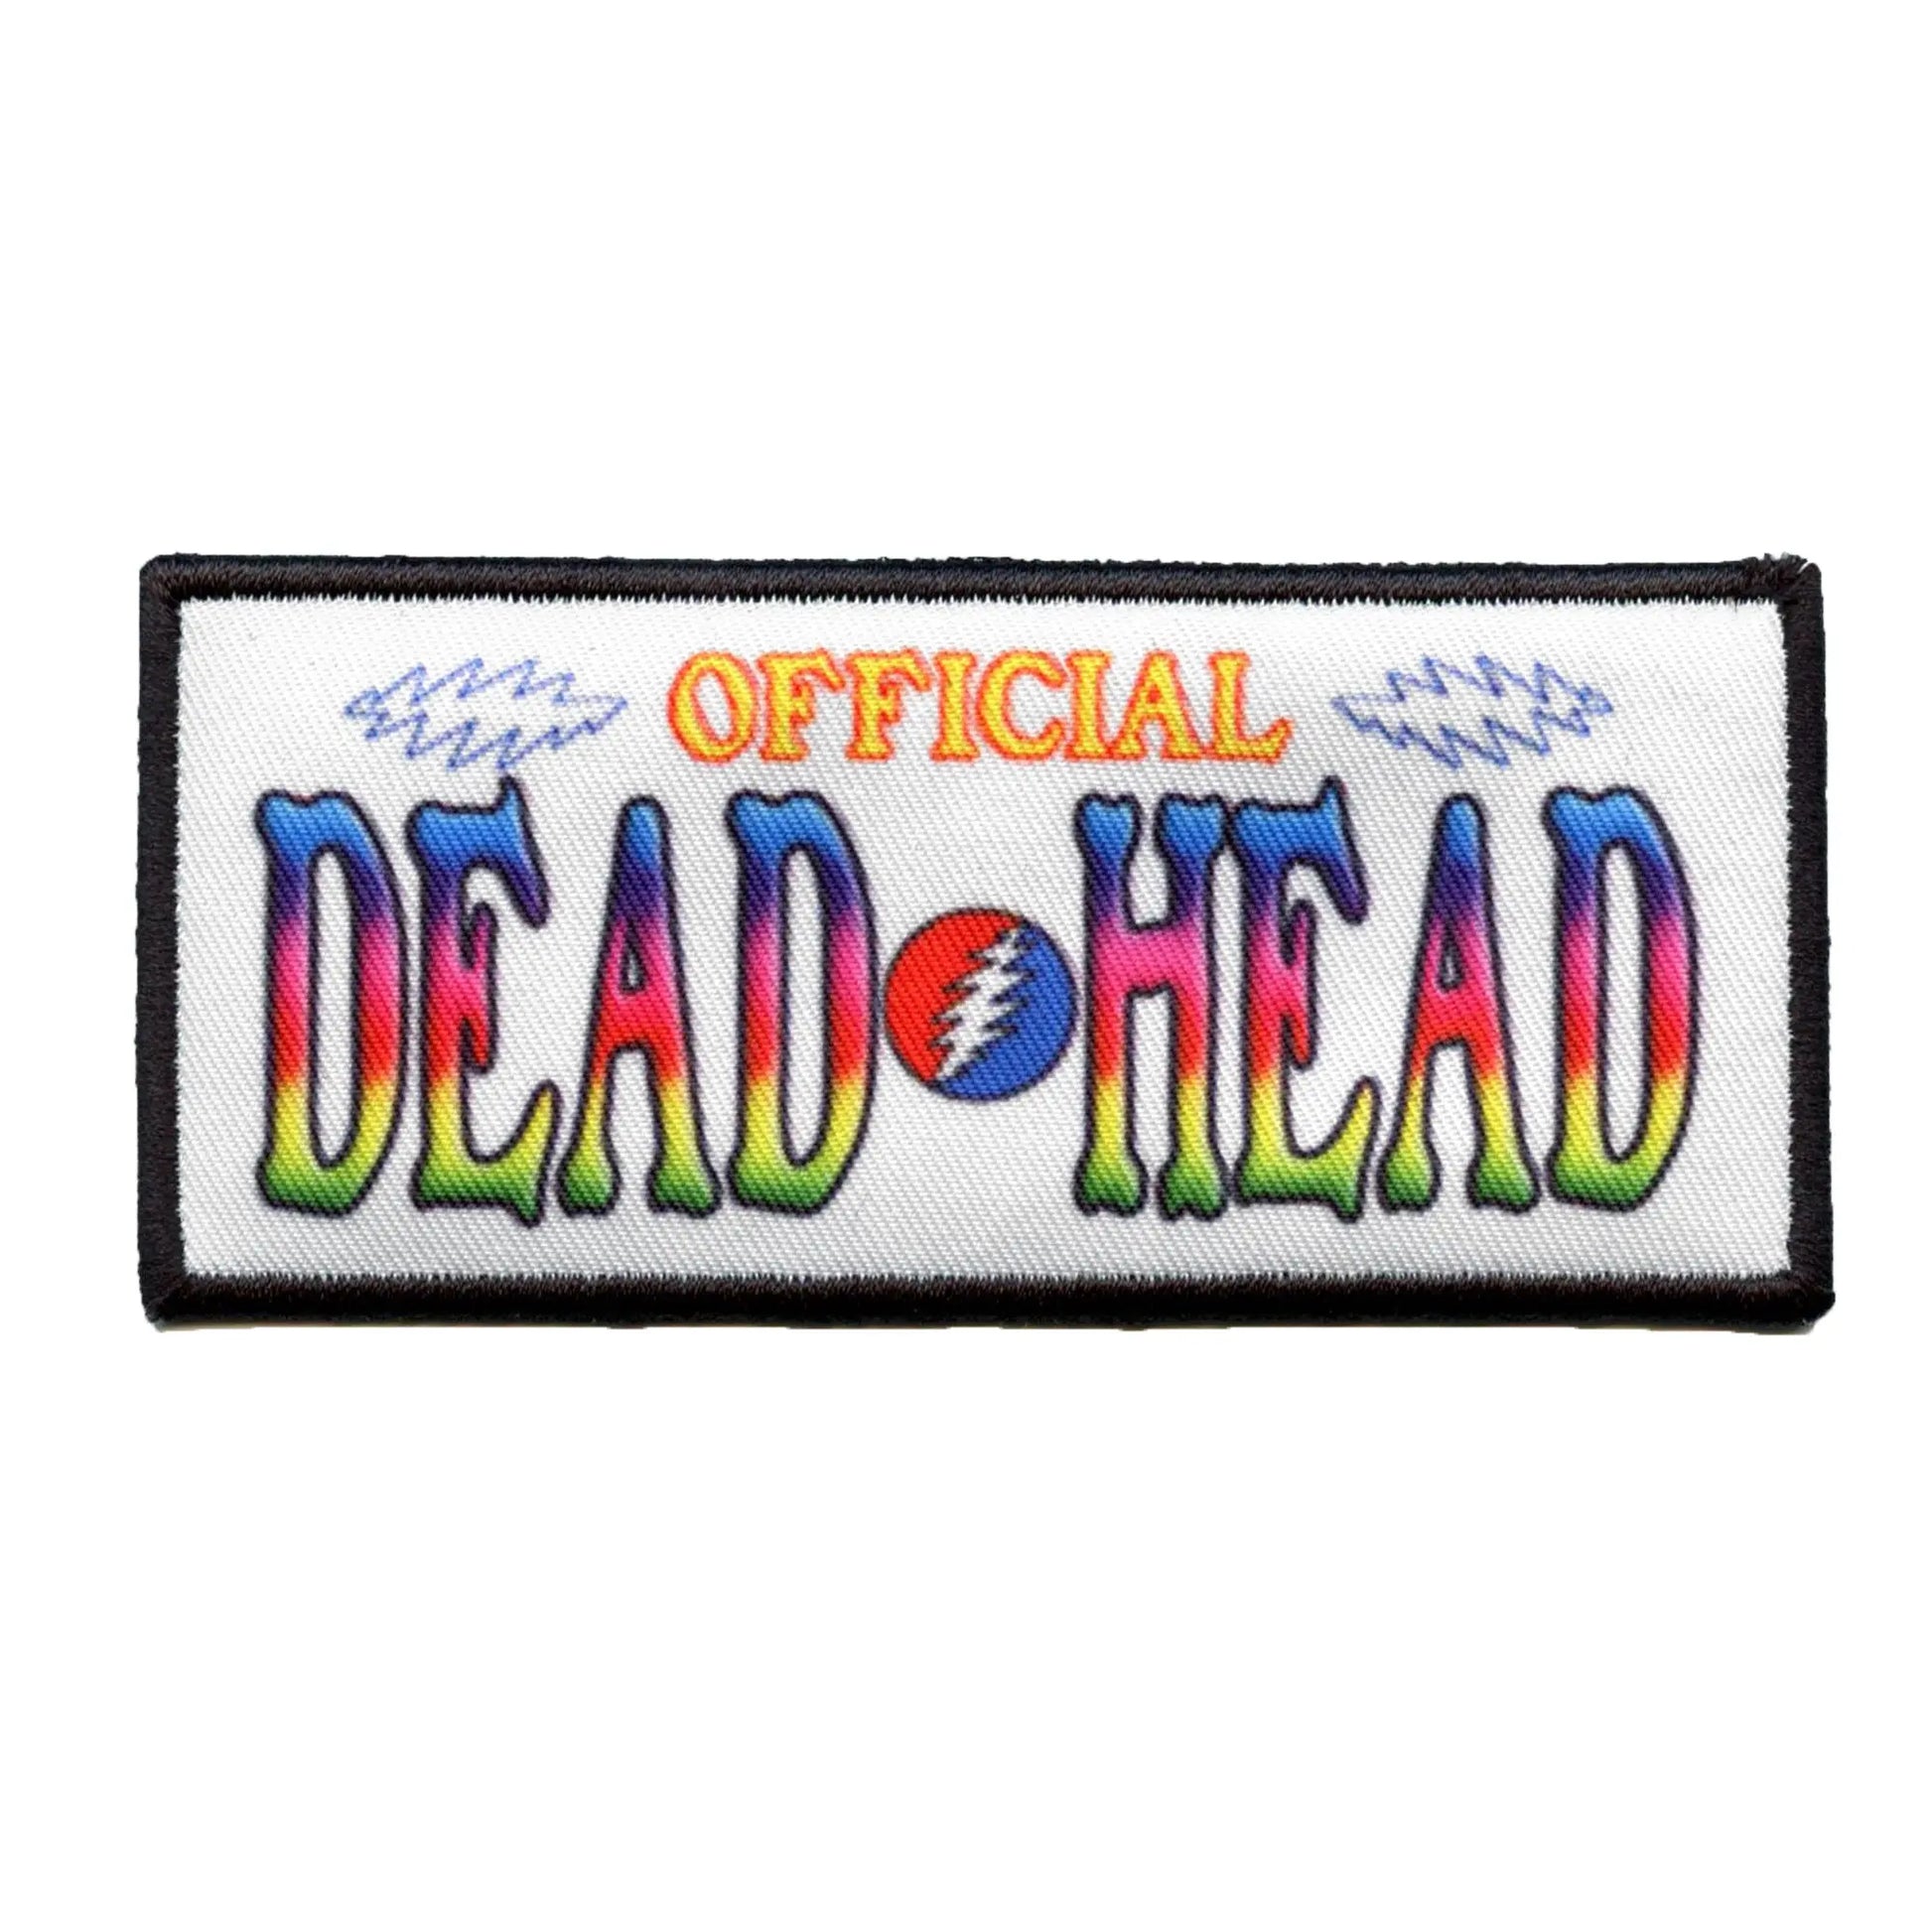 Official Dead Head Patch Iconic Rock Band Sublimated Embroidery Iron On